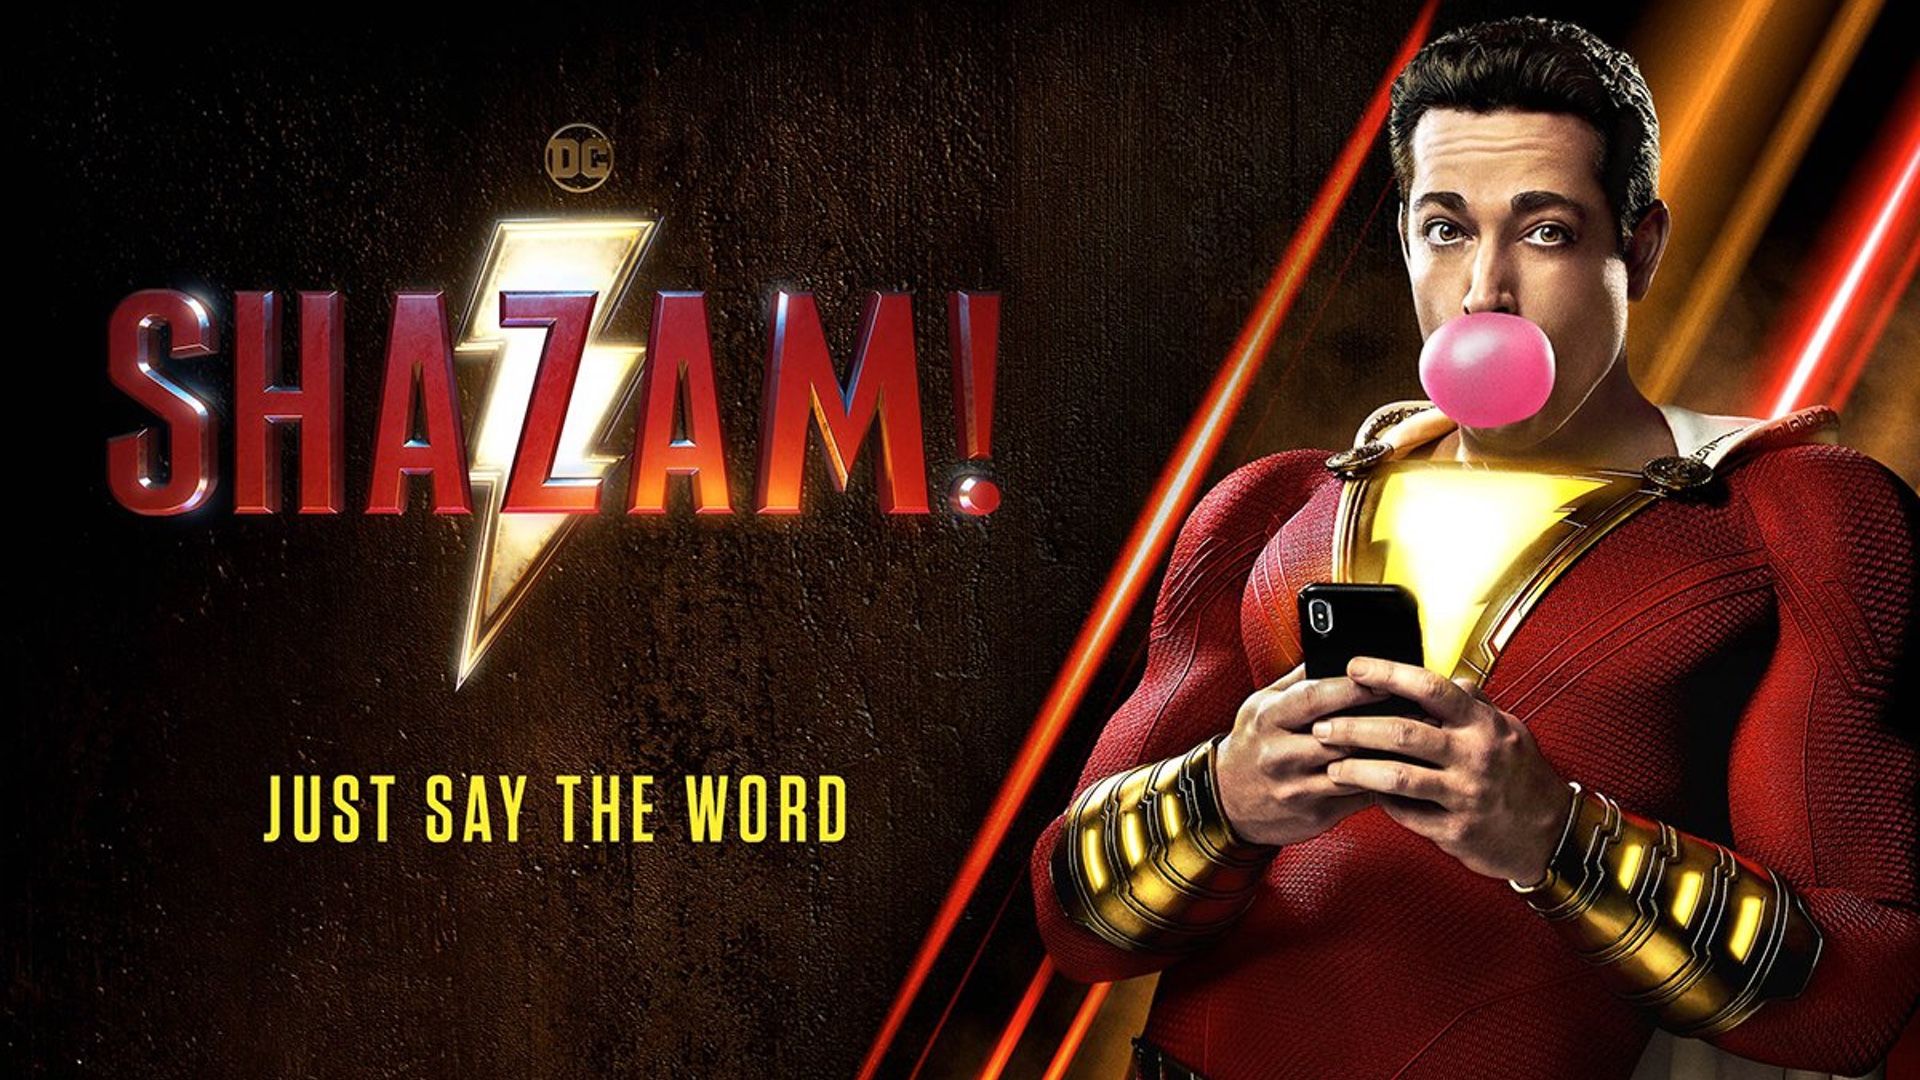 New Shazam! trailer continues fun adventures of learning